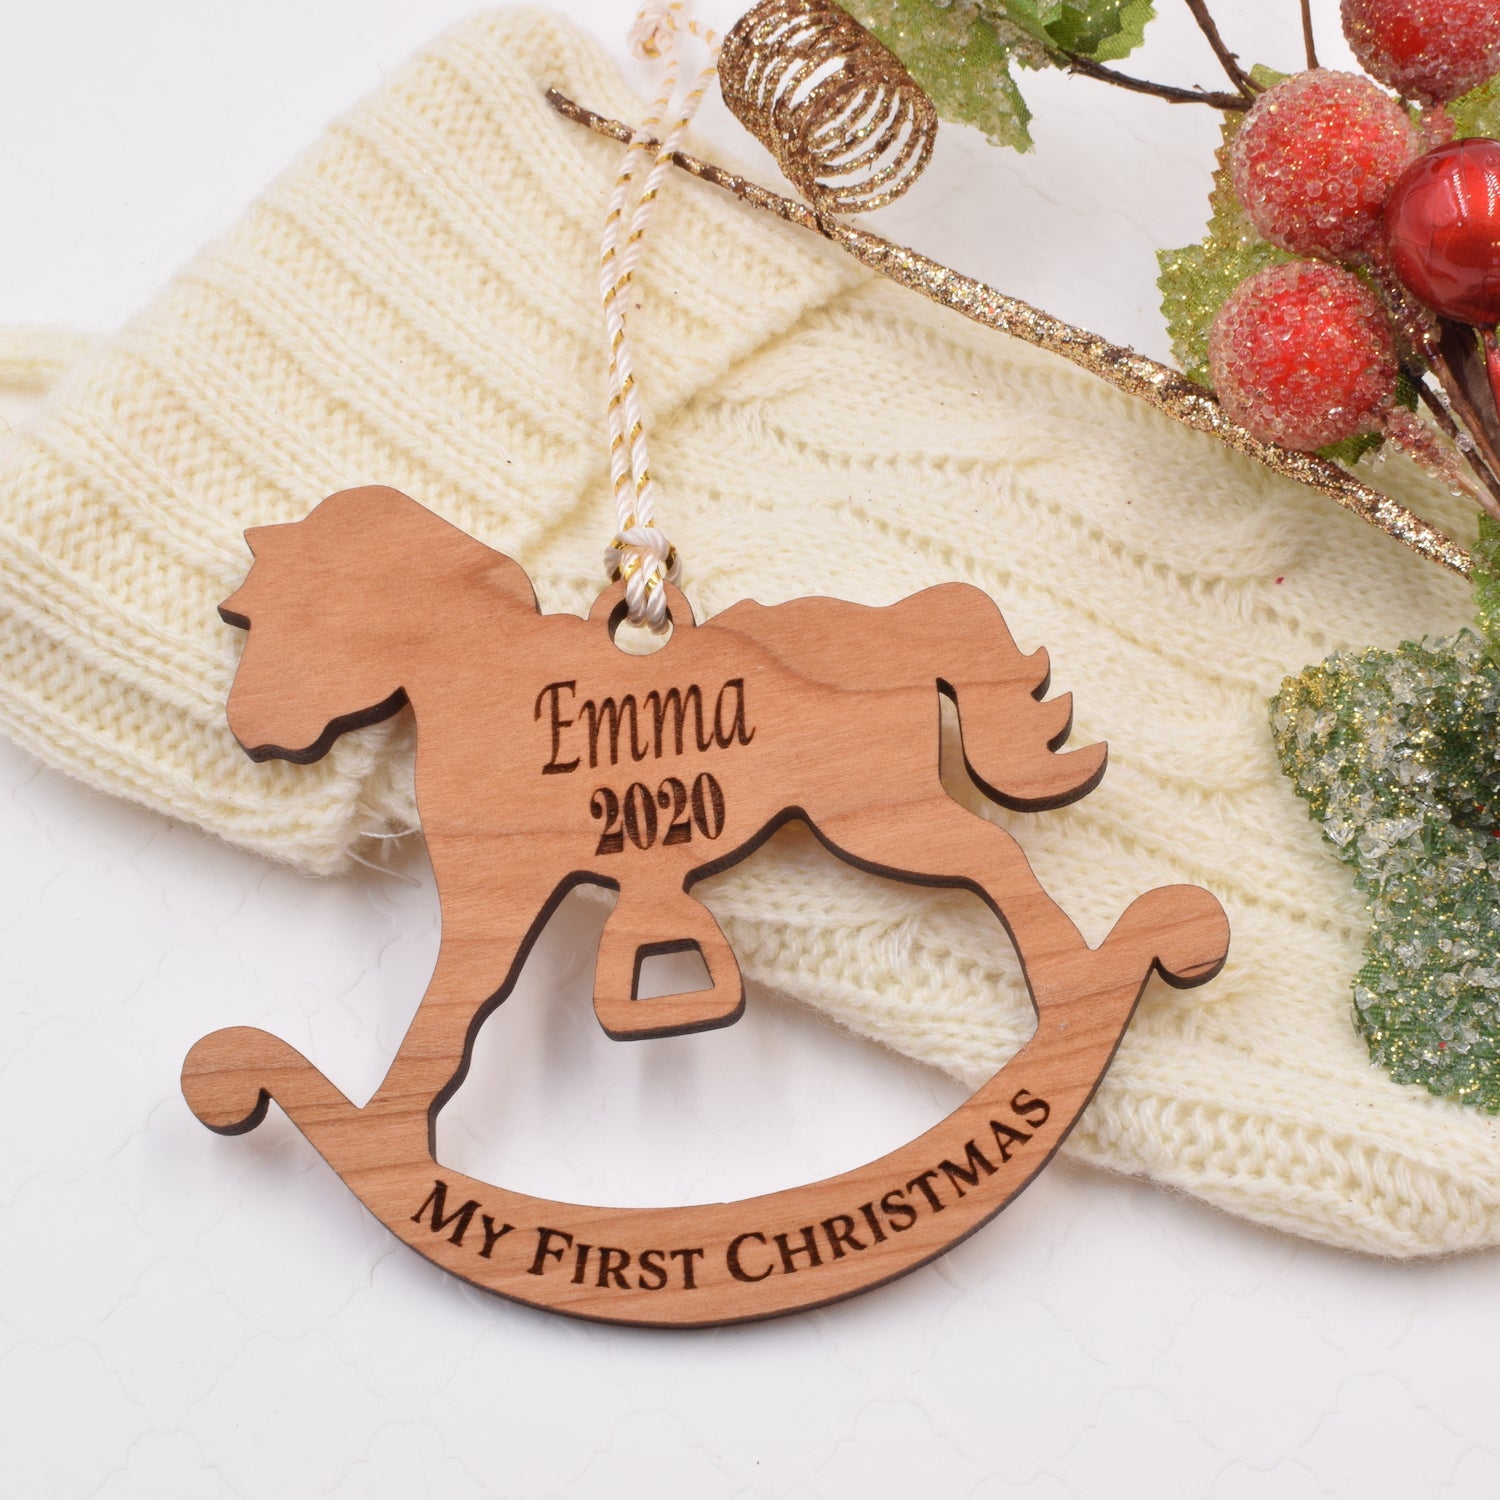 Miniature Baby's First Christmas Ornaments Personalized Name Set of 4 –  FinesseLaserDesigns